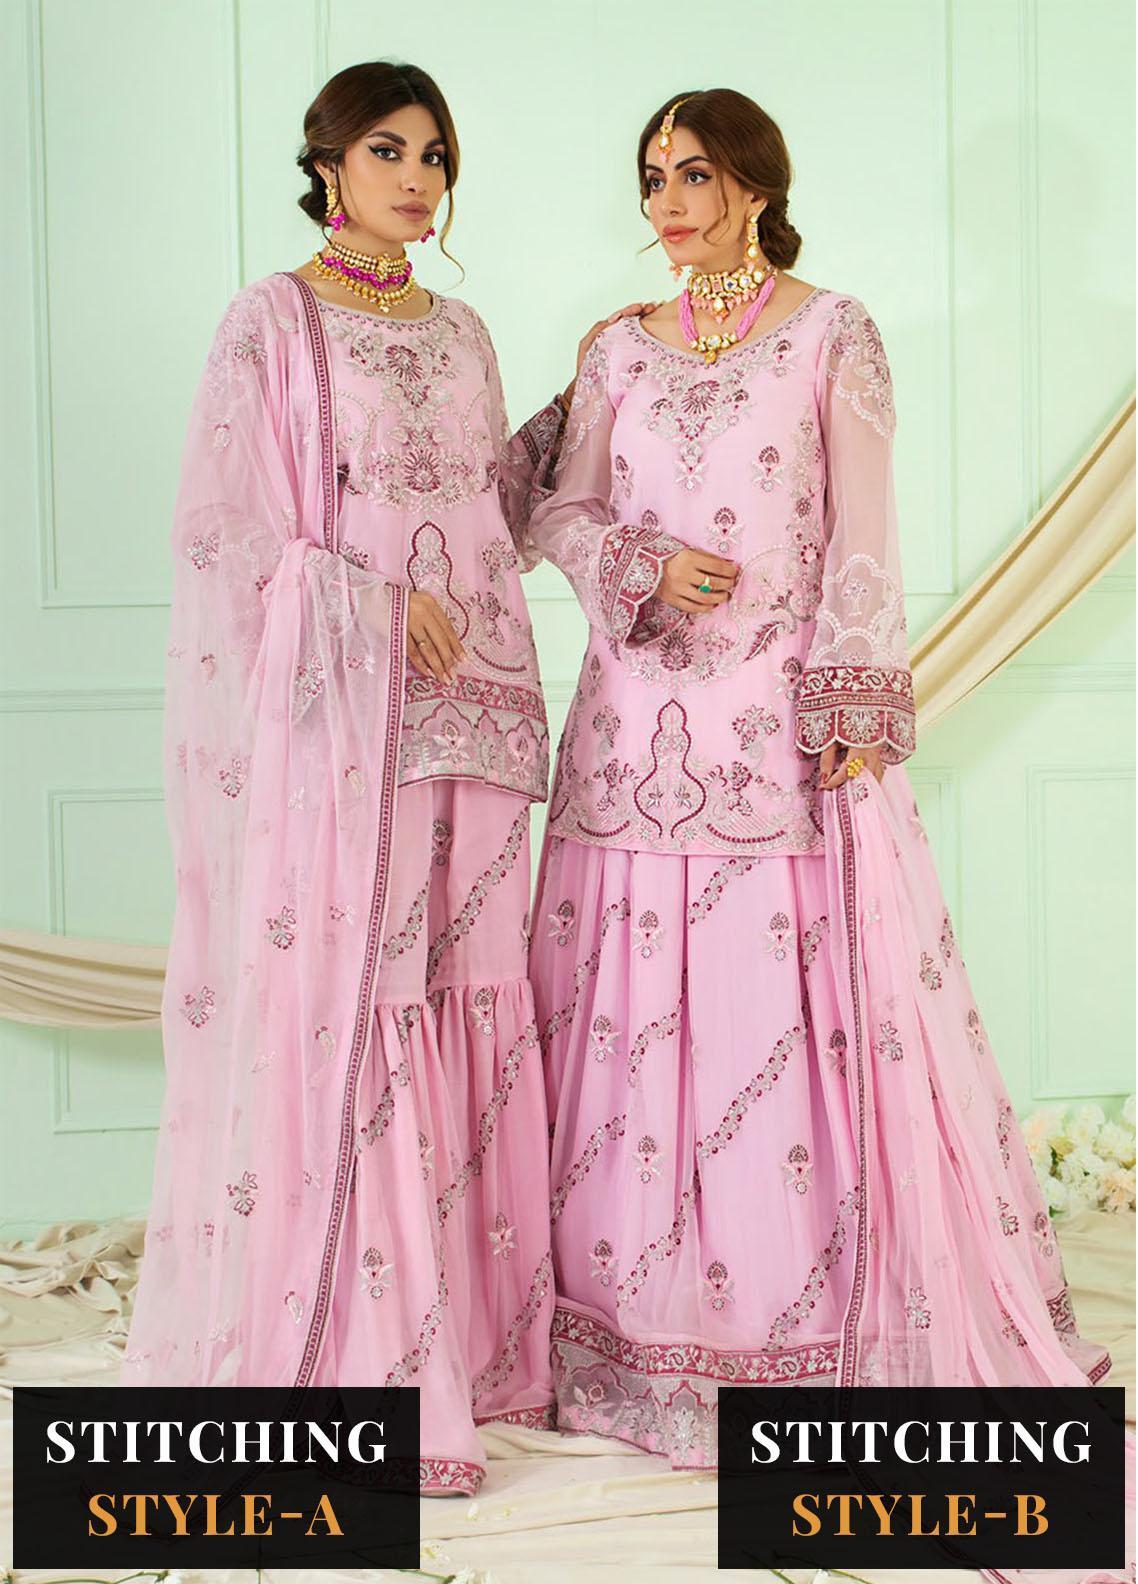 Belle Femme By Jasper Suiting Embroidered Chiffon Suits Unstitched 3 Piece JO-242 Blush Bay